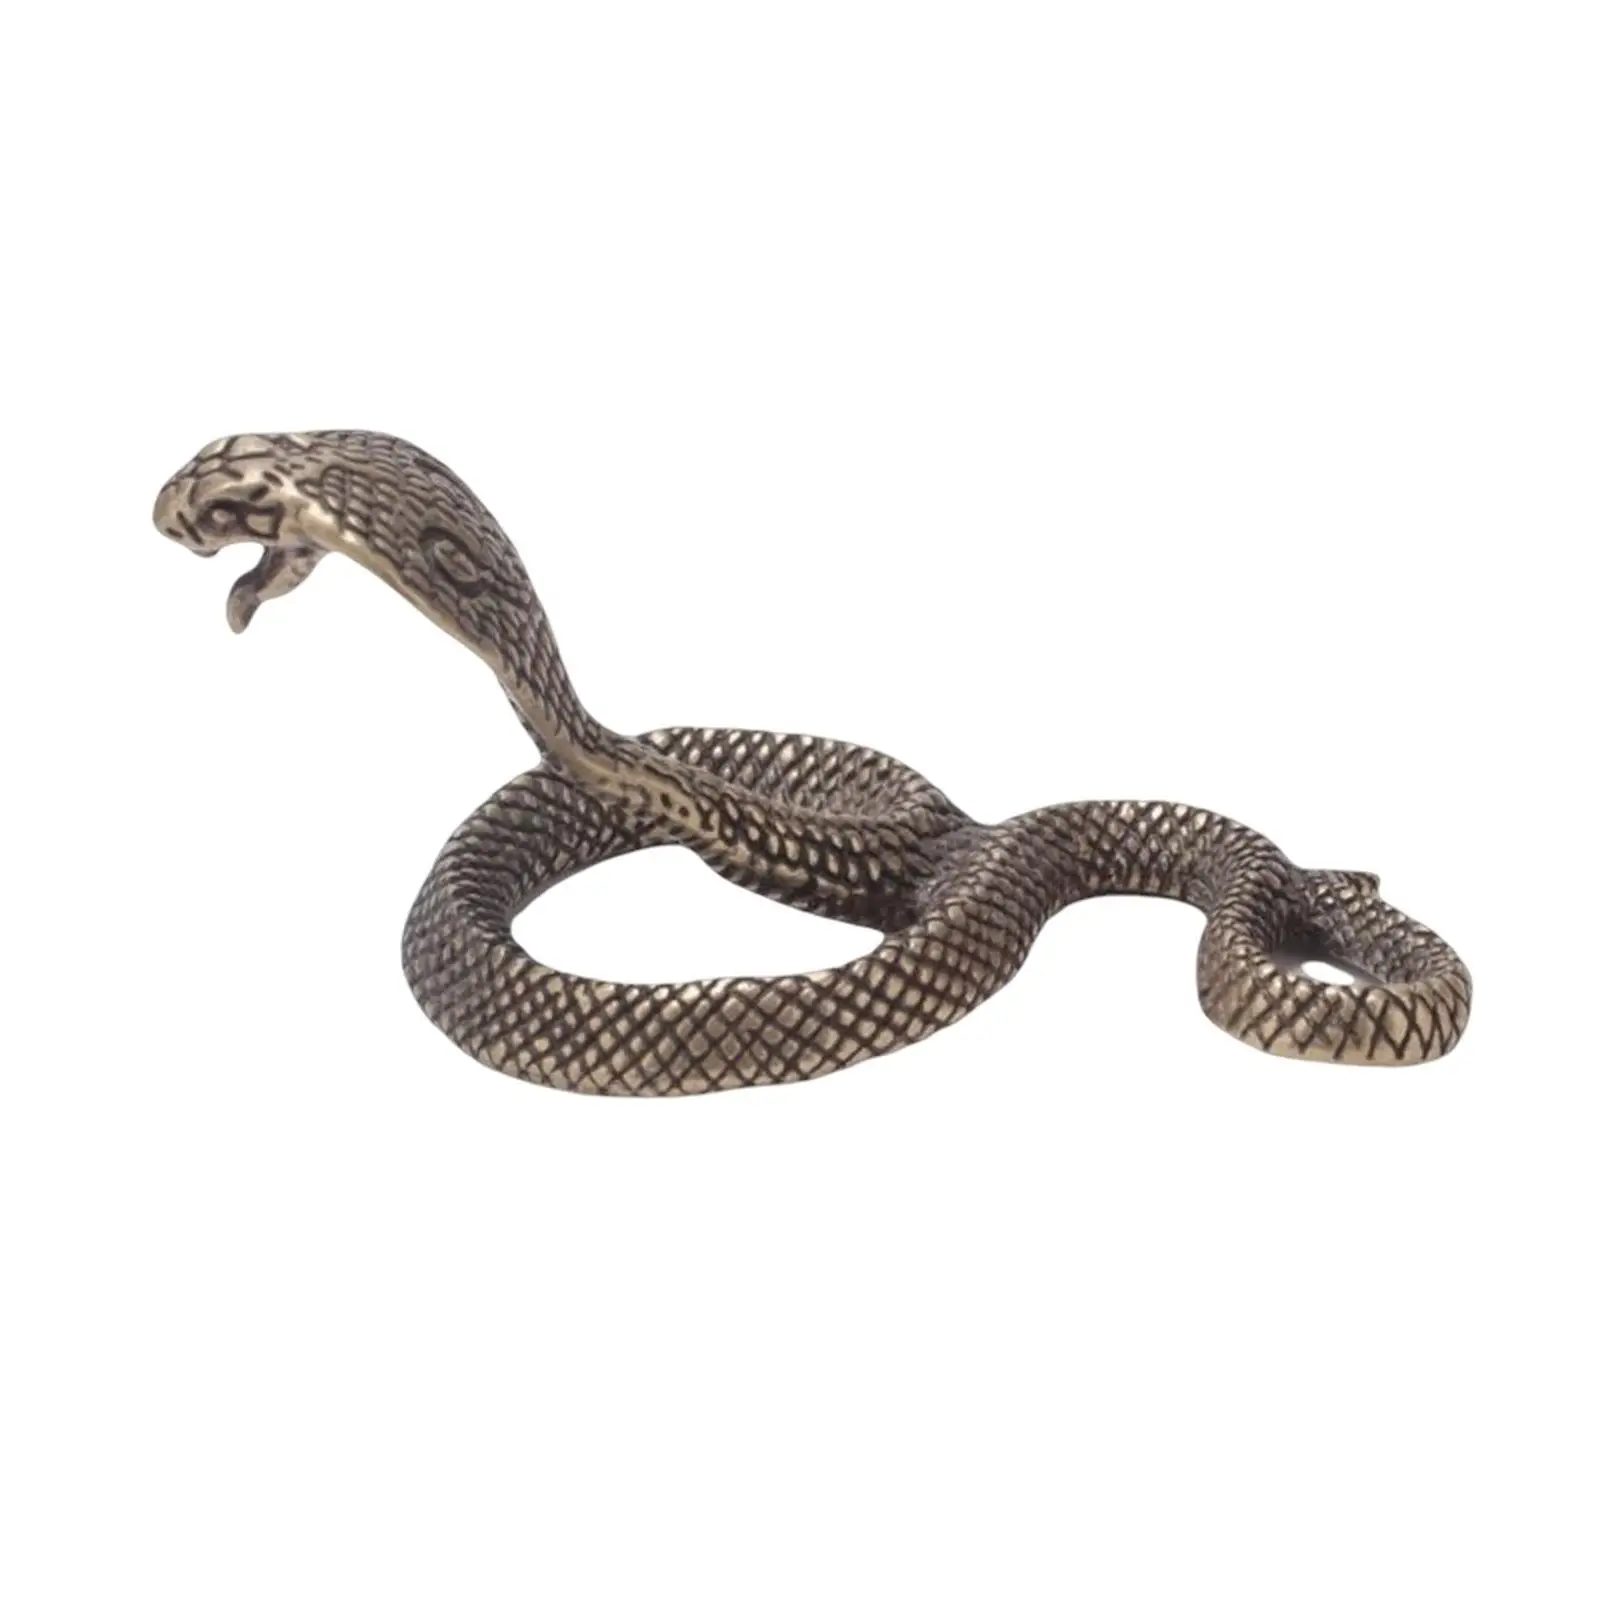 Antique Snake Statue Animal Collectibles Craft Decoration Brass Figurine Ornaments for Apartment Table Gifts Kitchen Cabinet